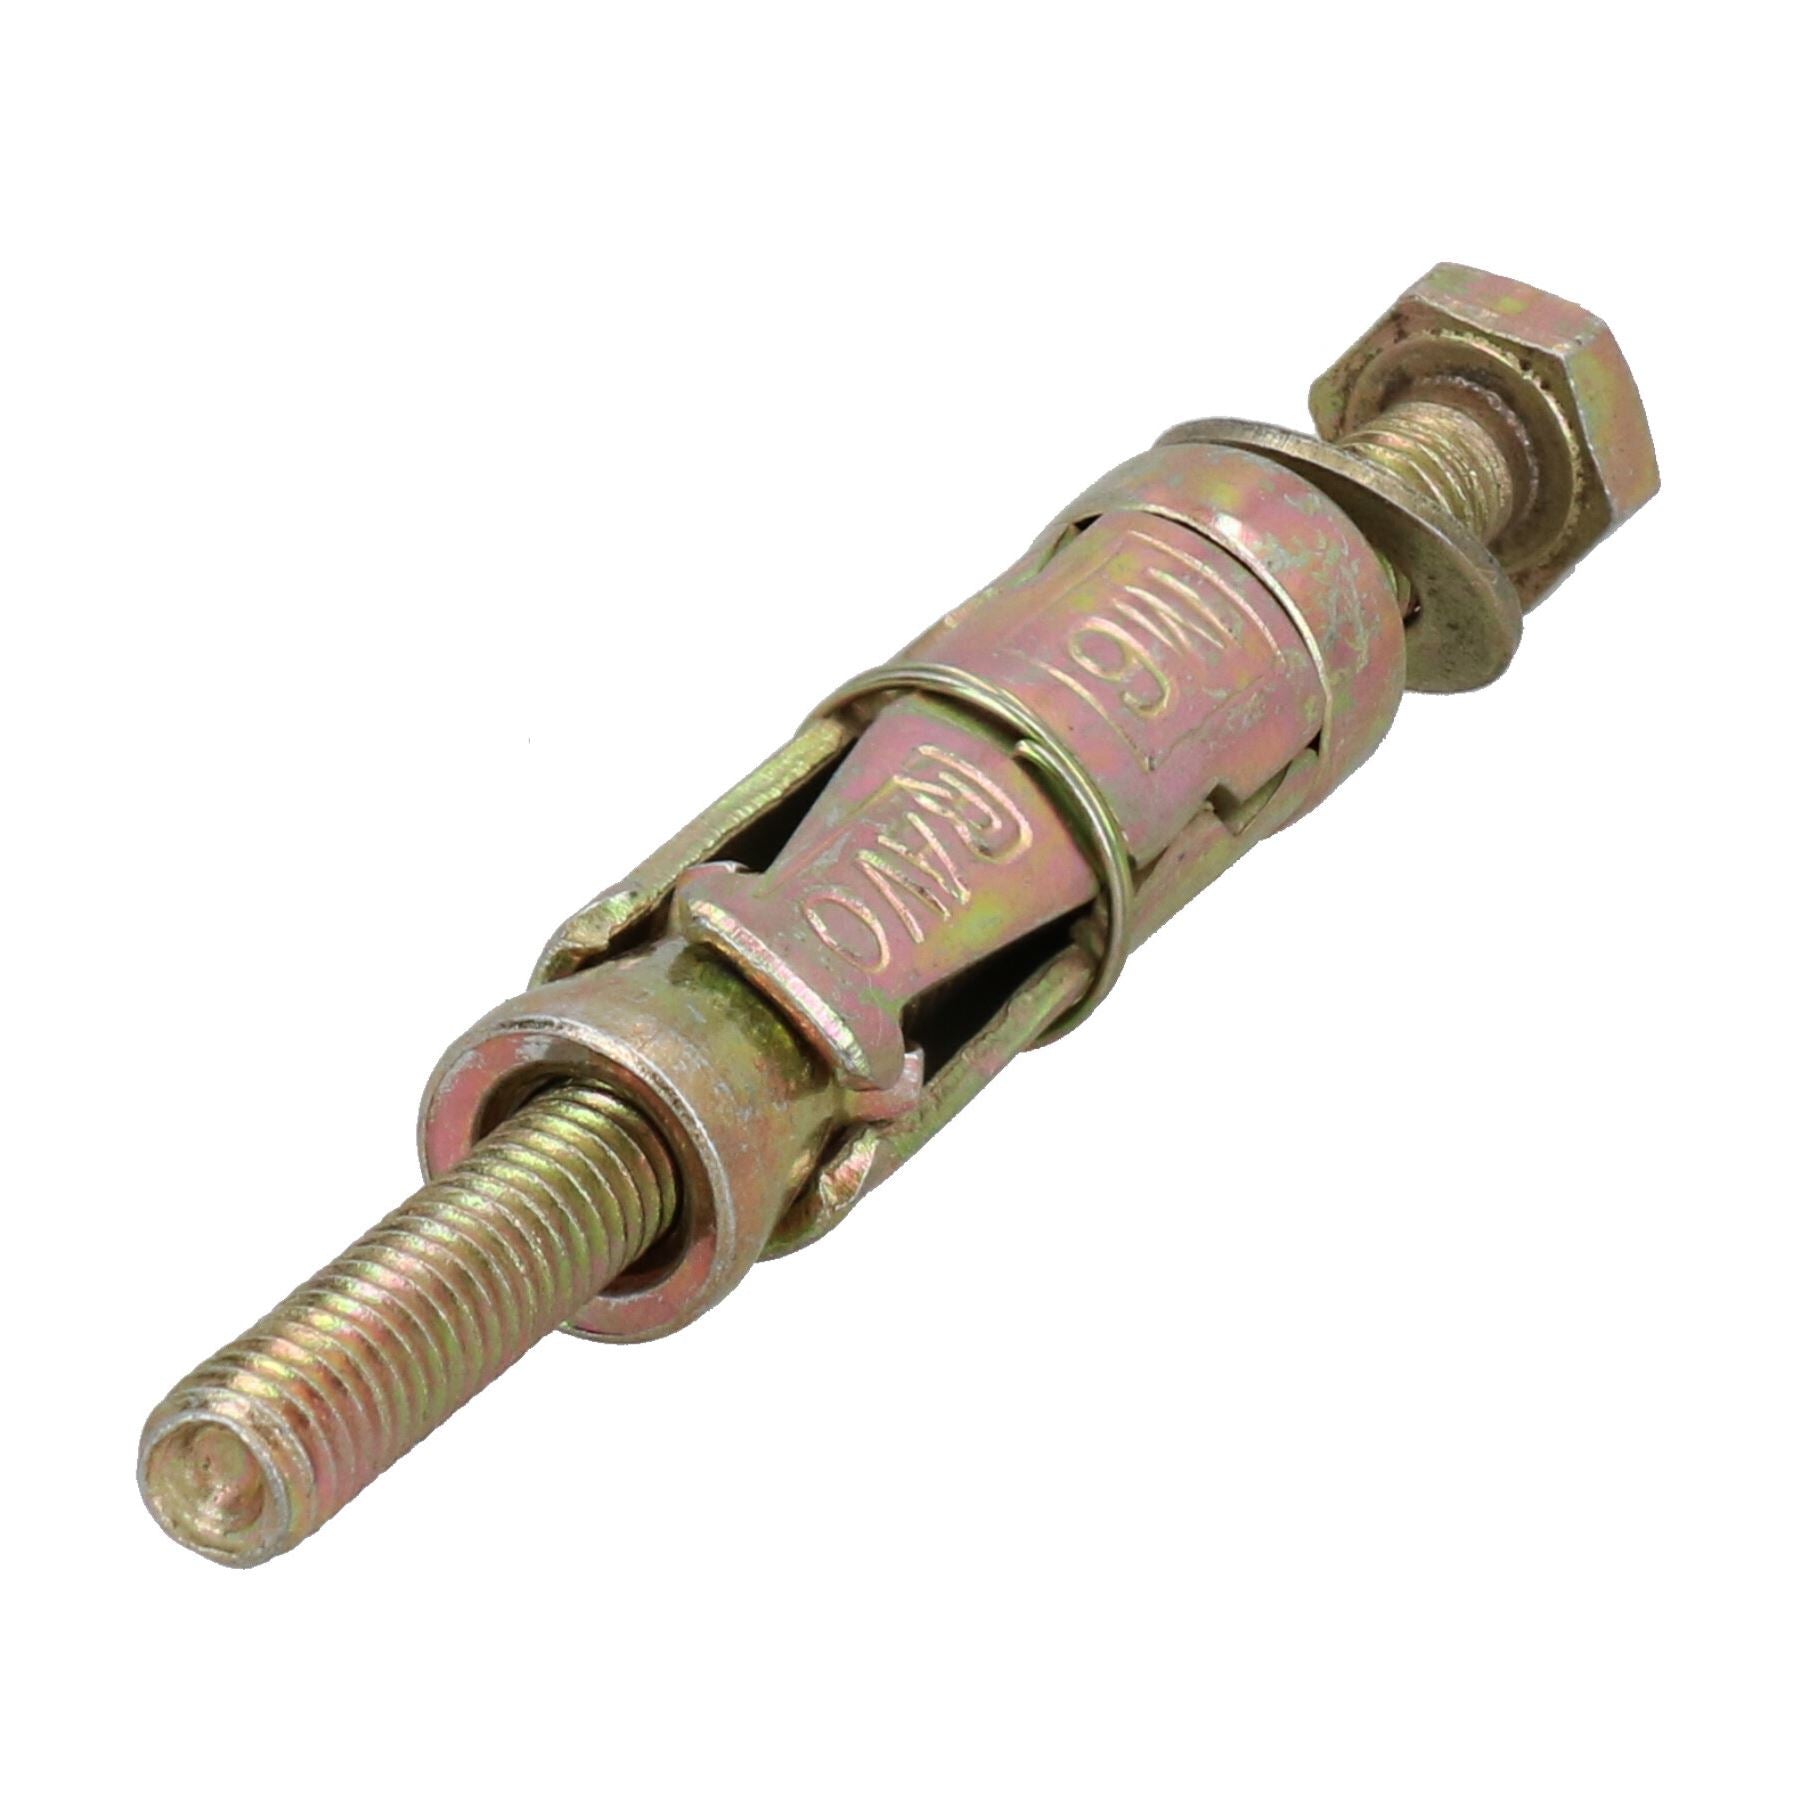 M6 6mm x 75mm Expansion Rawl Bolt for Masonry Sleeve Anchors Fastener